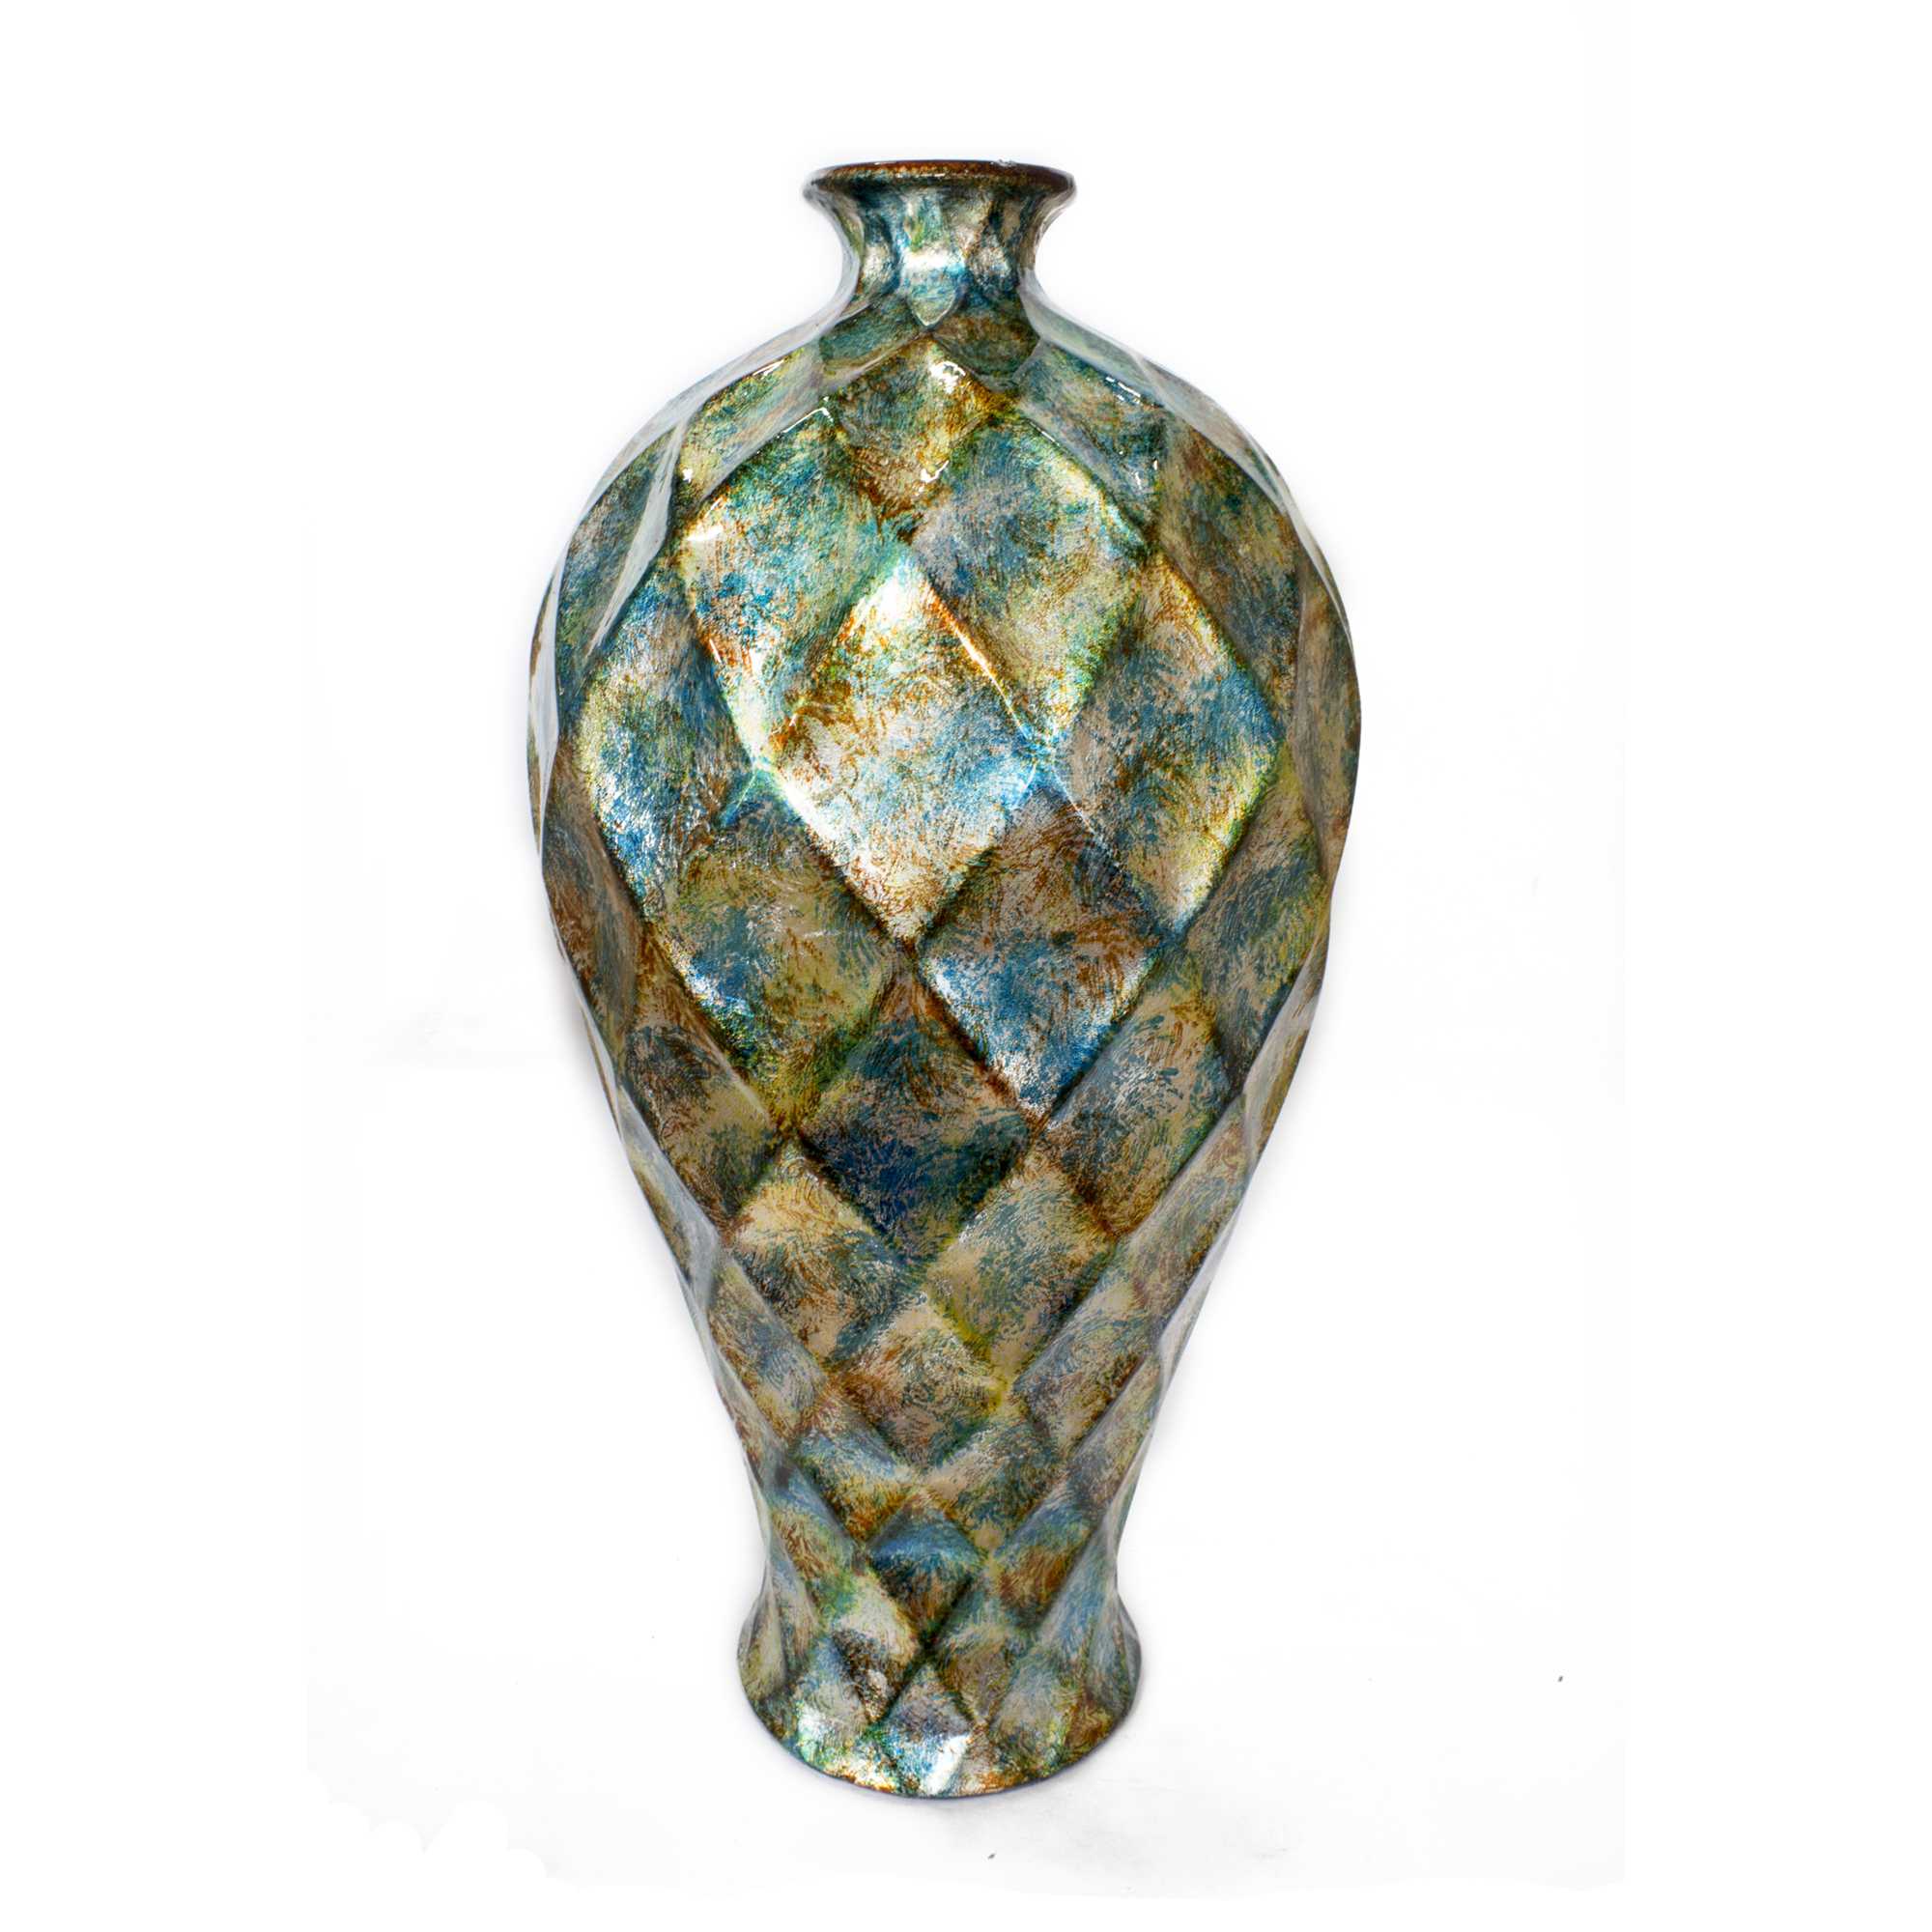 11" X 11" X 19.5" Green Gold Orange Ceramic Foiled and Lacquered Faceted Plum Vase